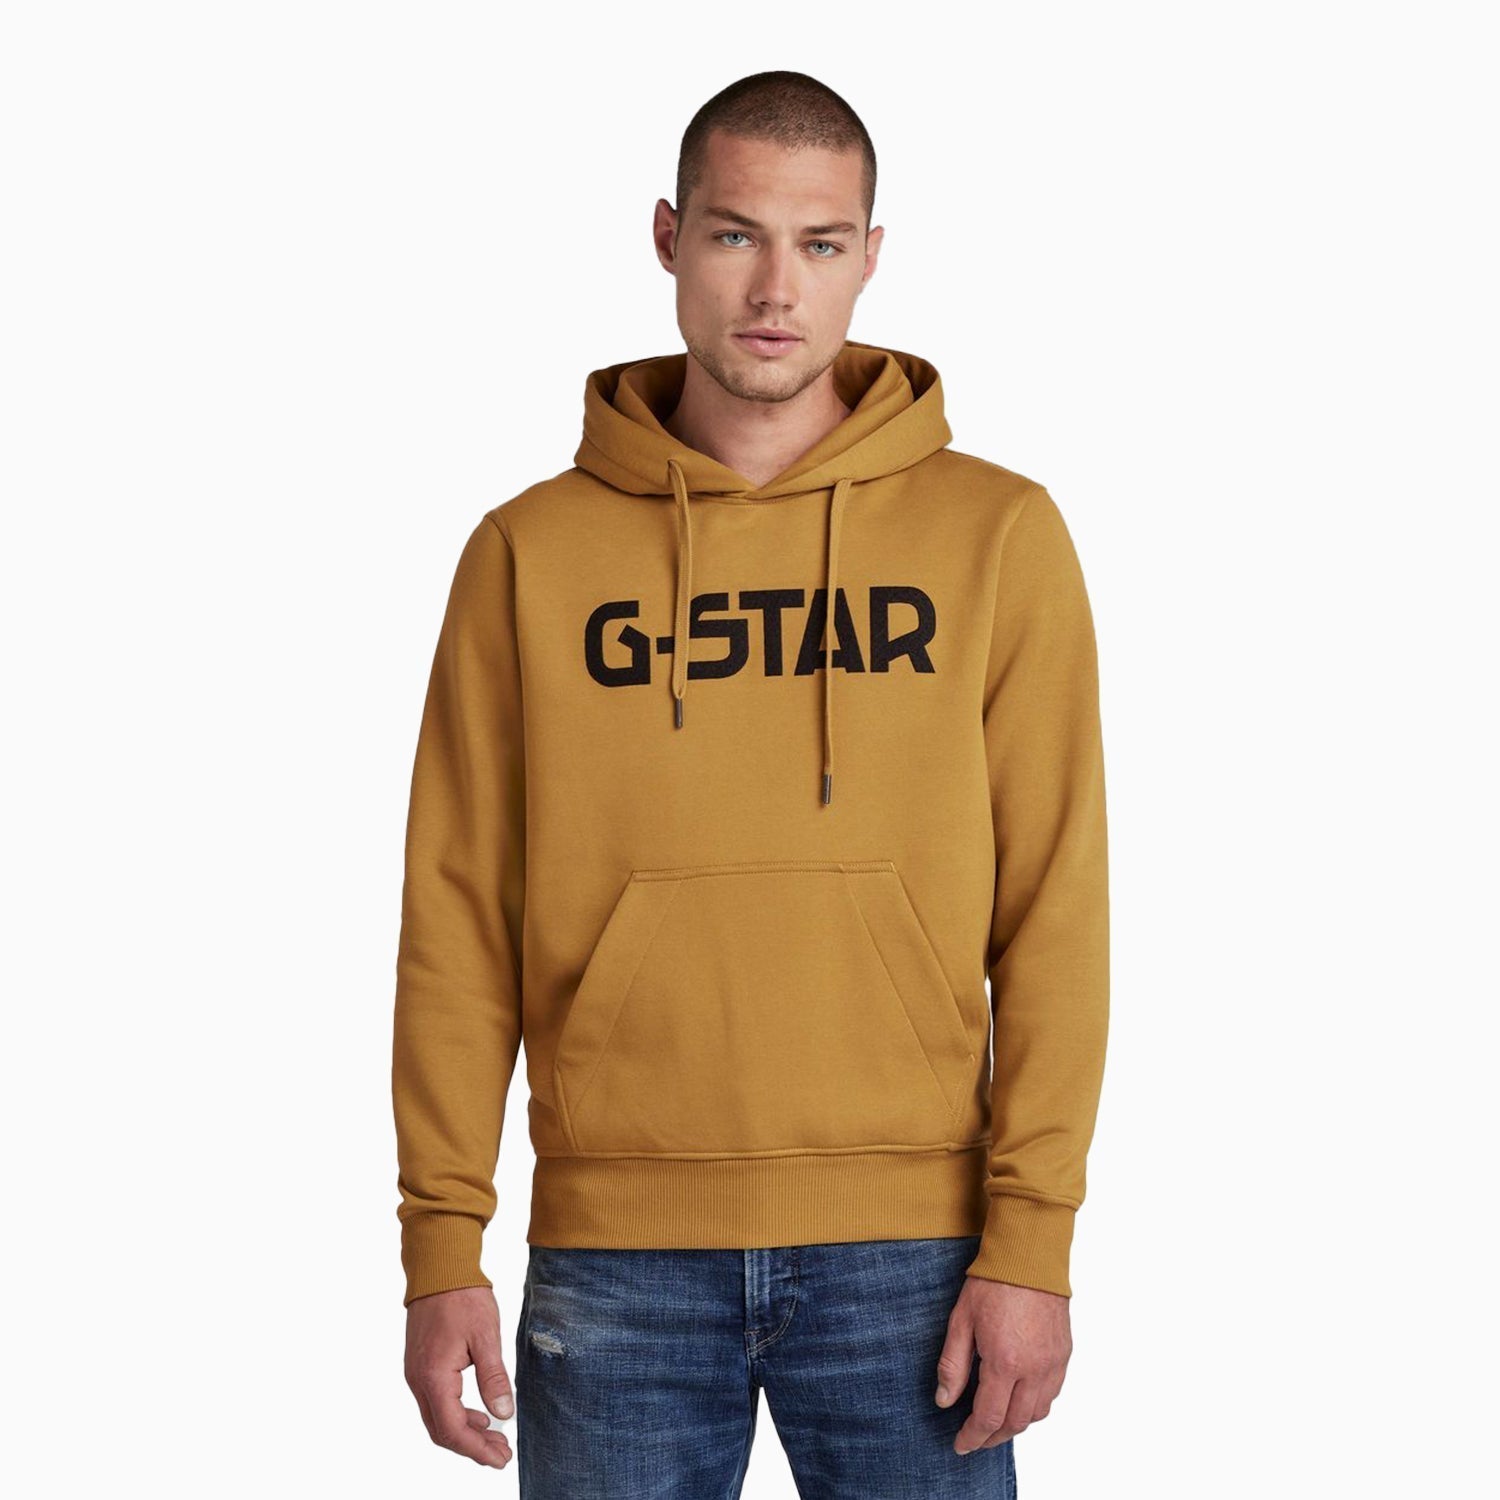 g-star-raw-mens-g-star-logo-pull-over-hoodie-d20508-a971-c623